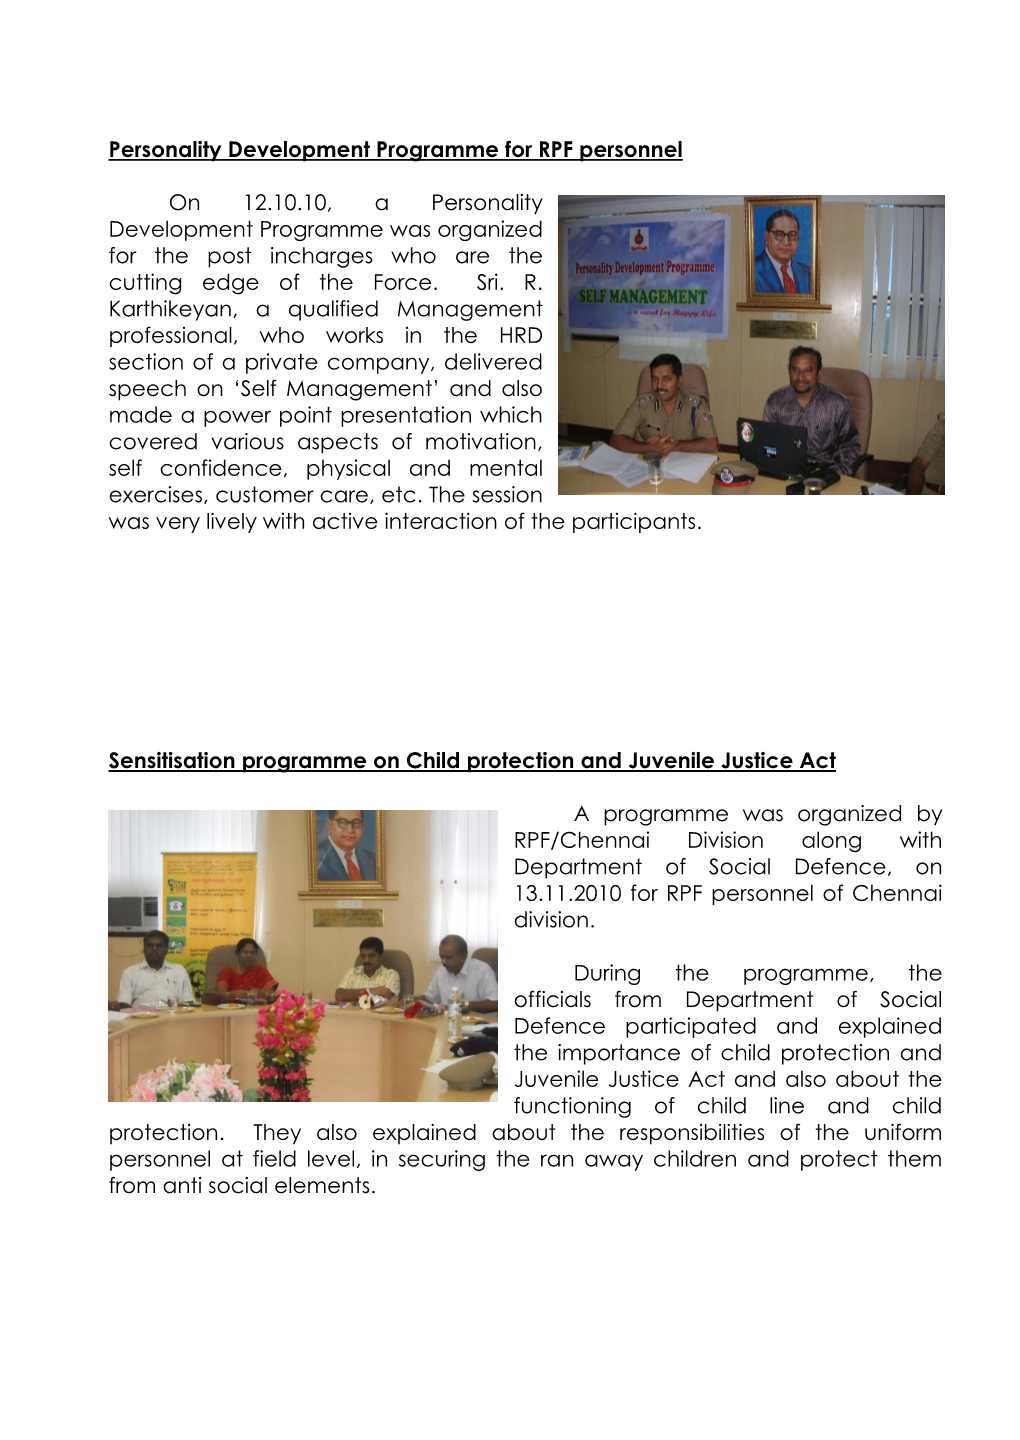 Personality Development Programme for RPF Personnel